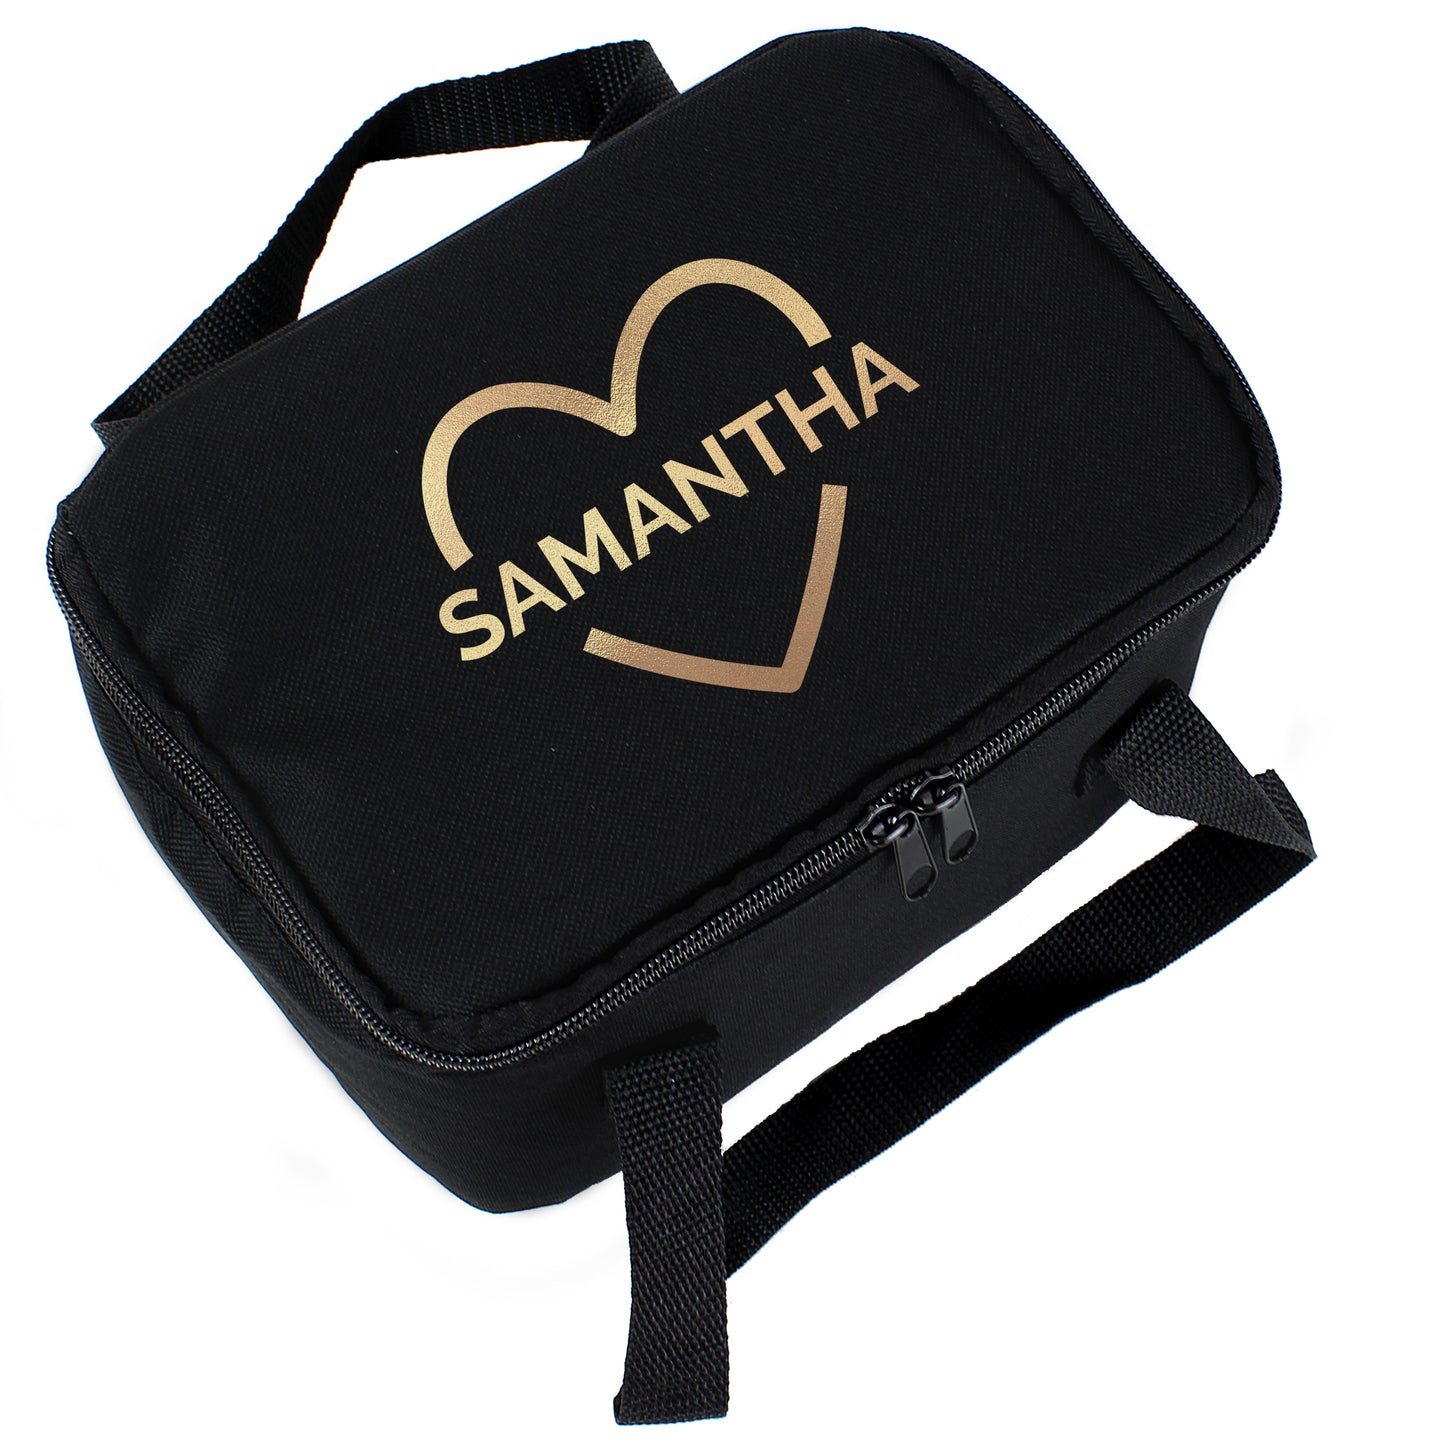 Personalised Gold Heart Black Lunch Bag - Personalise It!